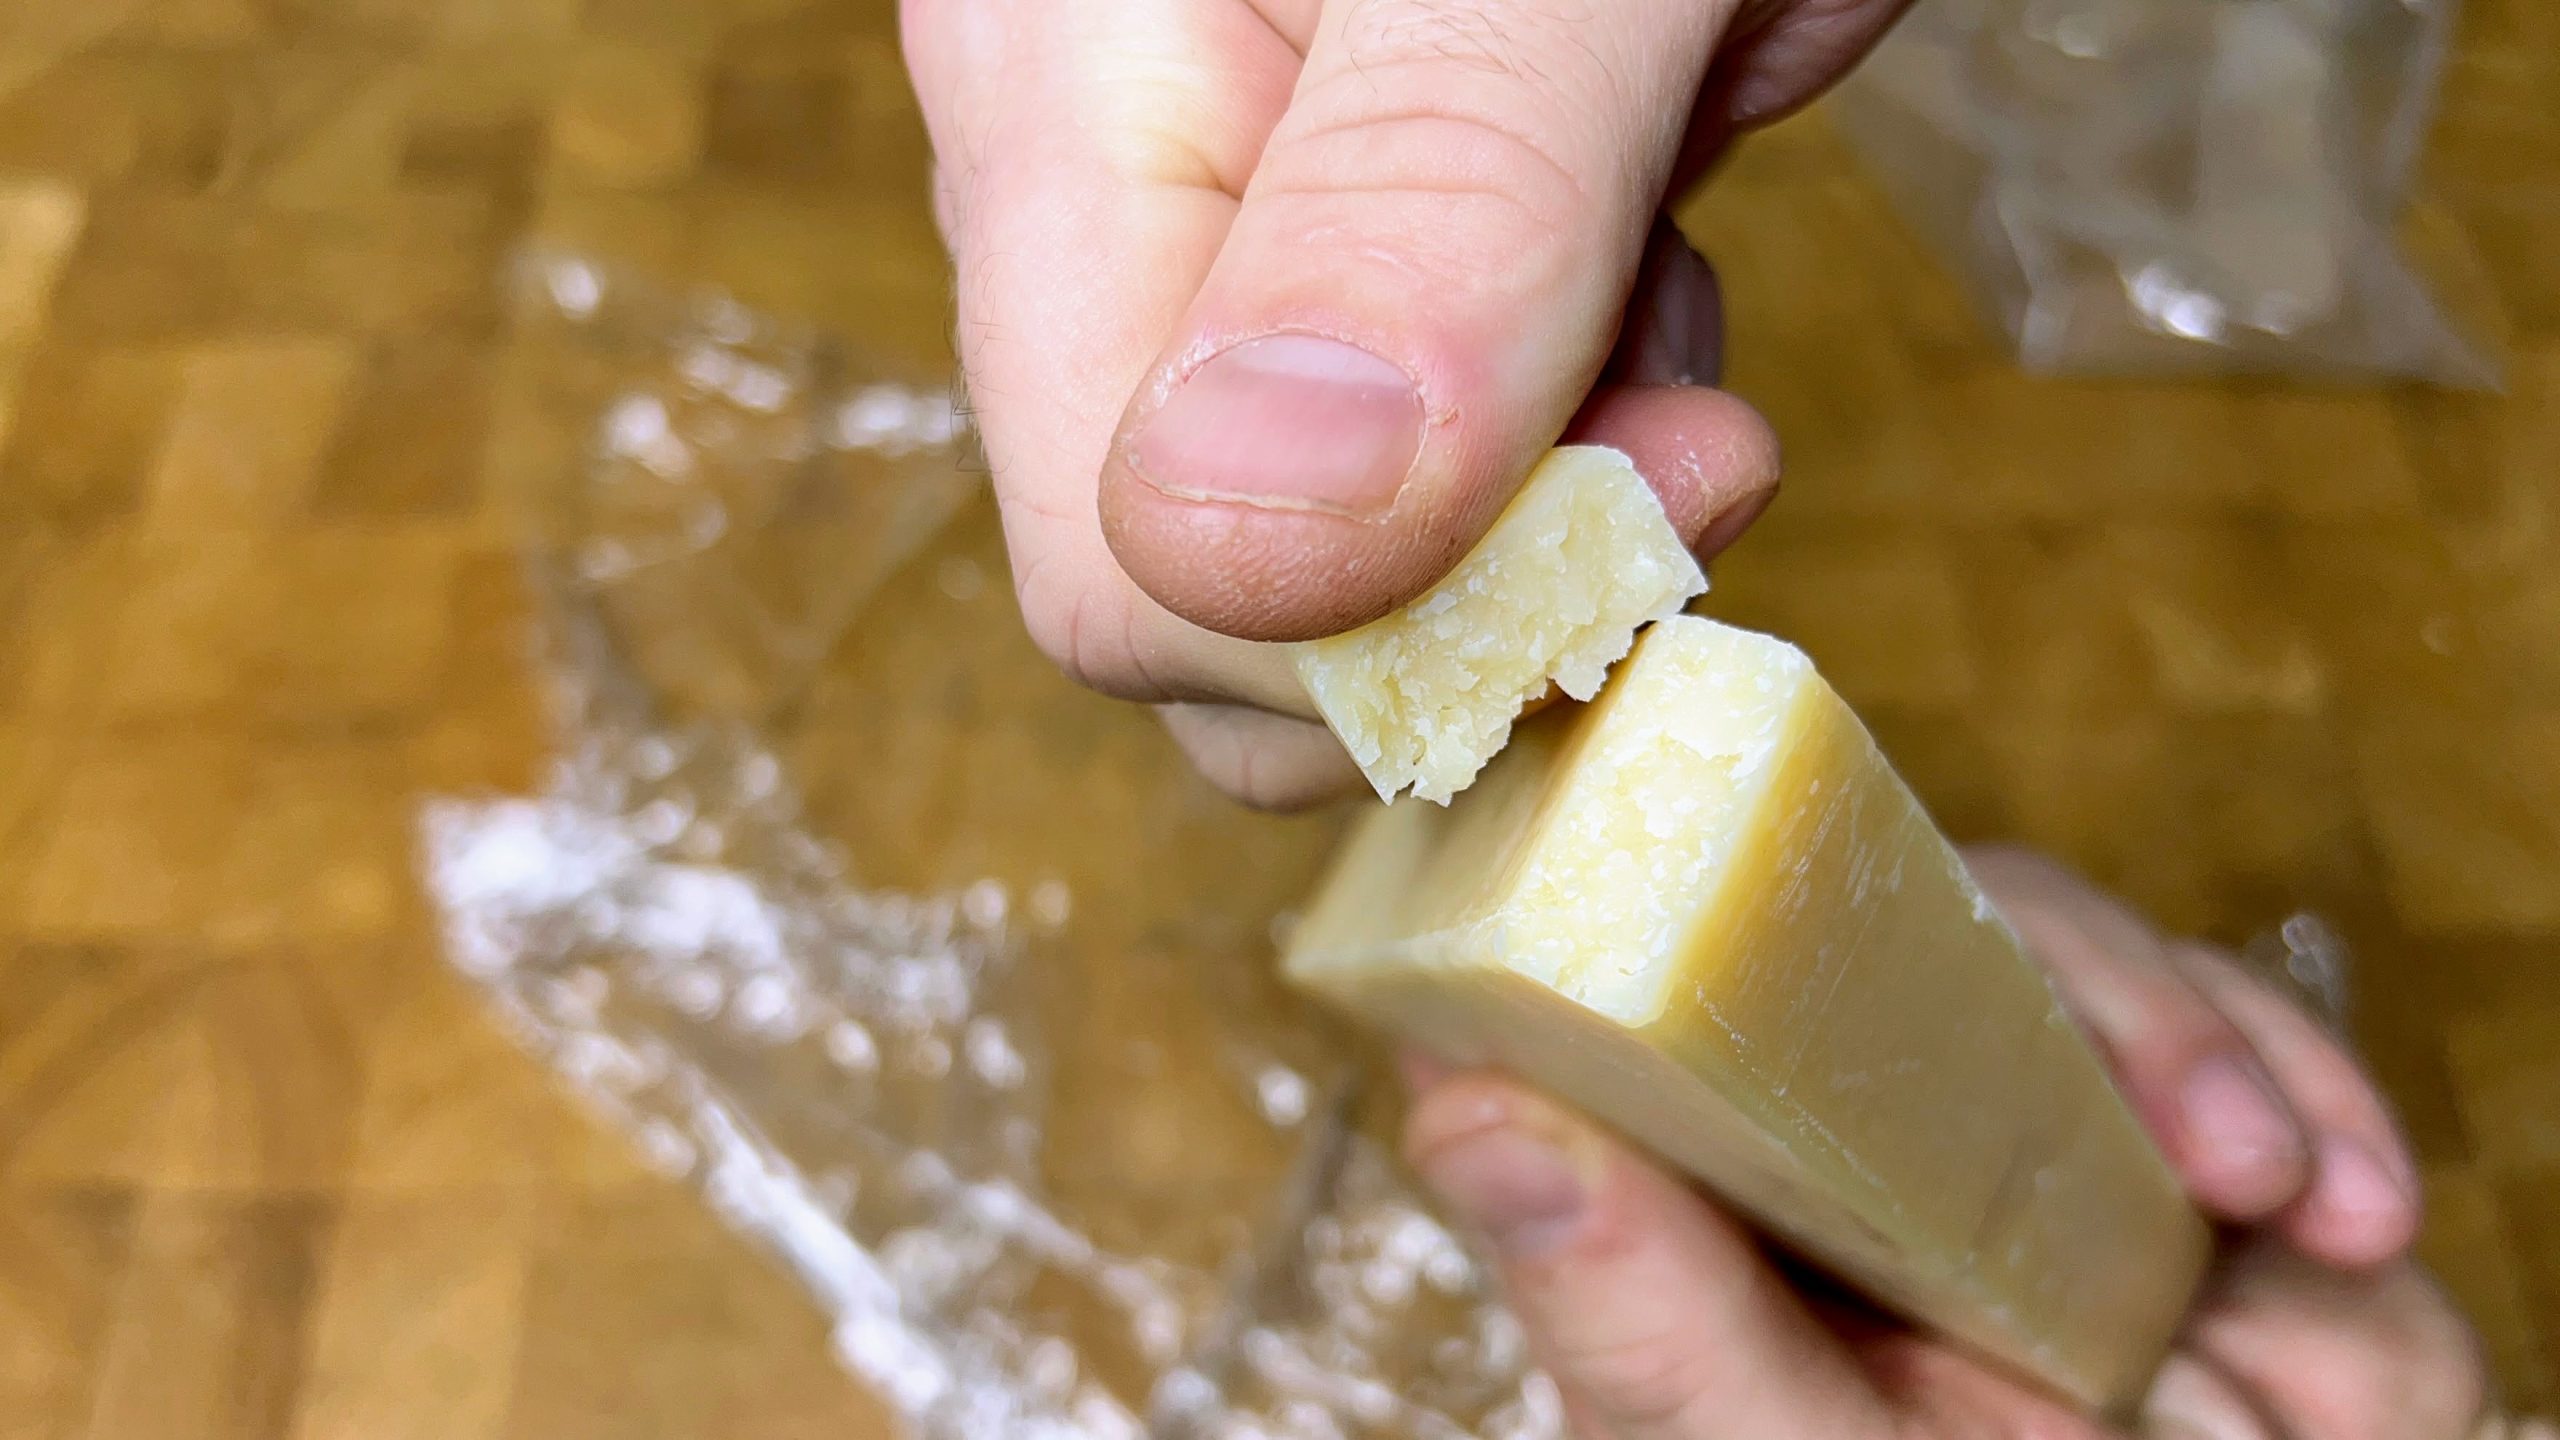 tearing a piece off a block of defrosted parmesan cheese